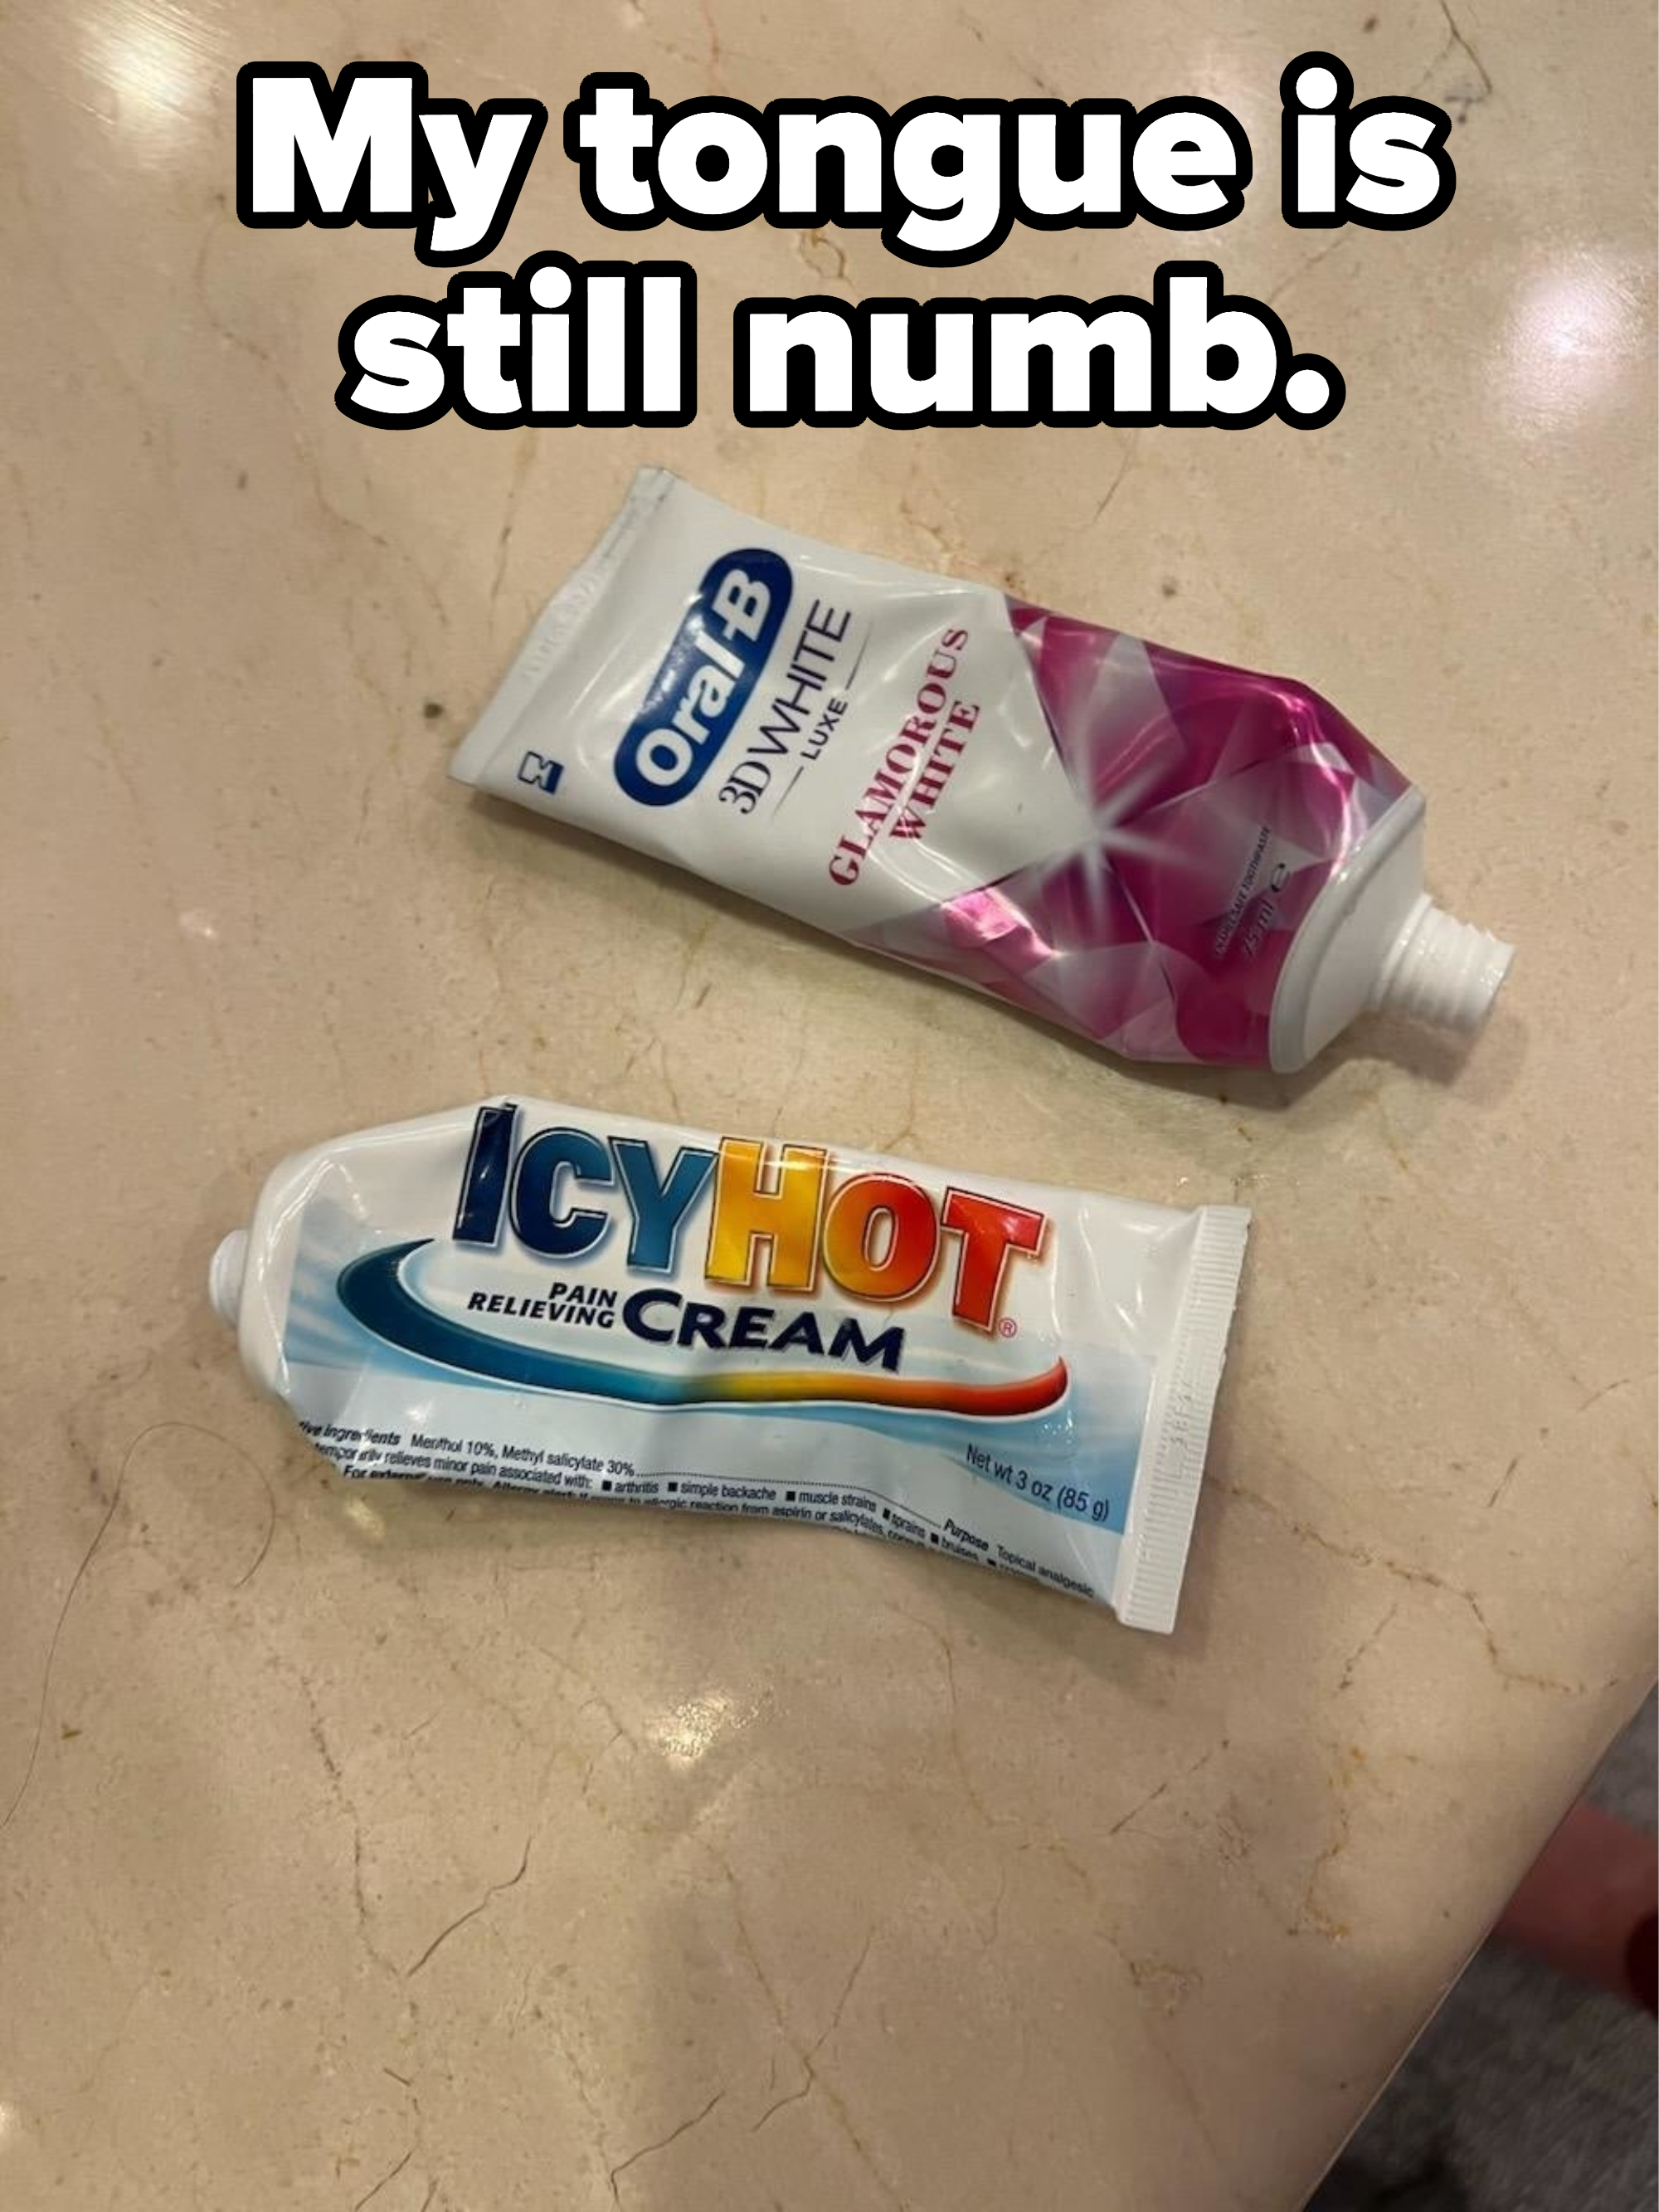 A person confused a tube of Icy Hot pain relieving cream for toothpaste